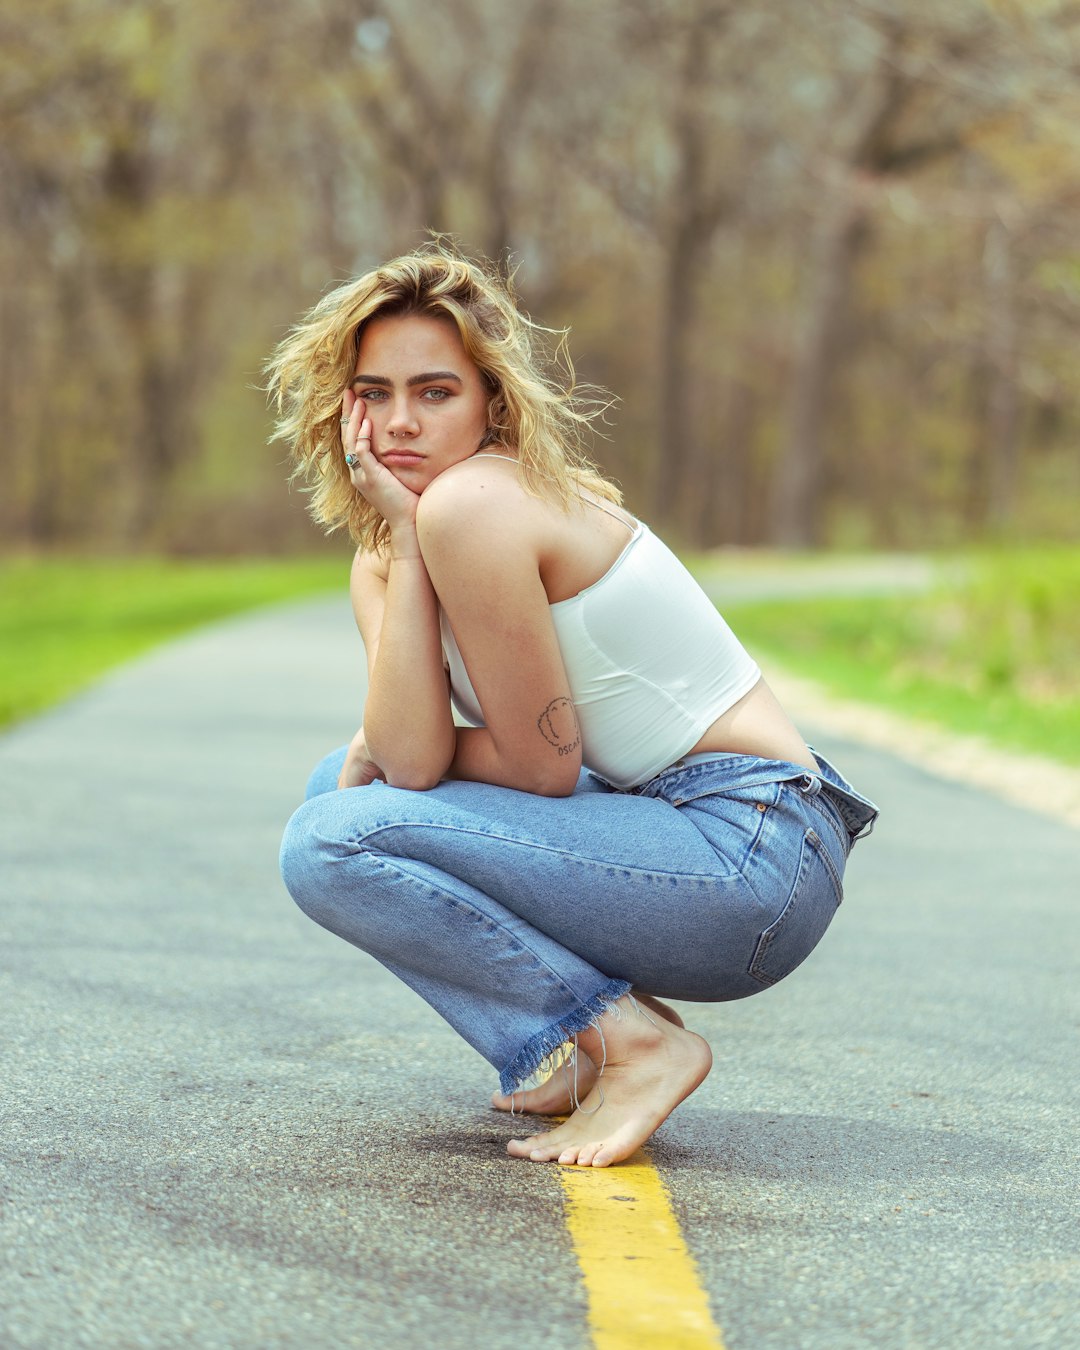 woman in white tank top and blue denim jeans sitting on road during daytime